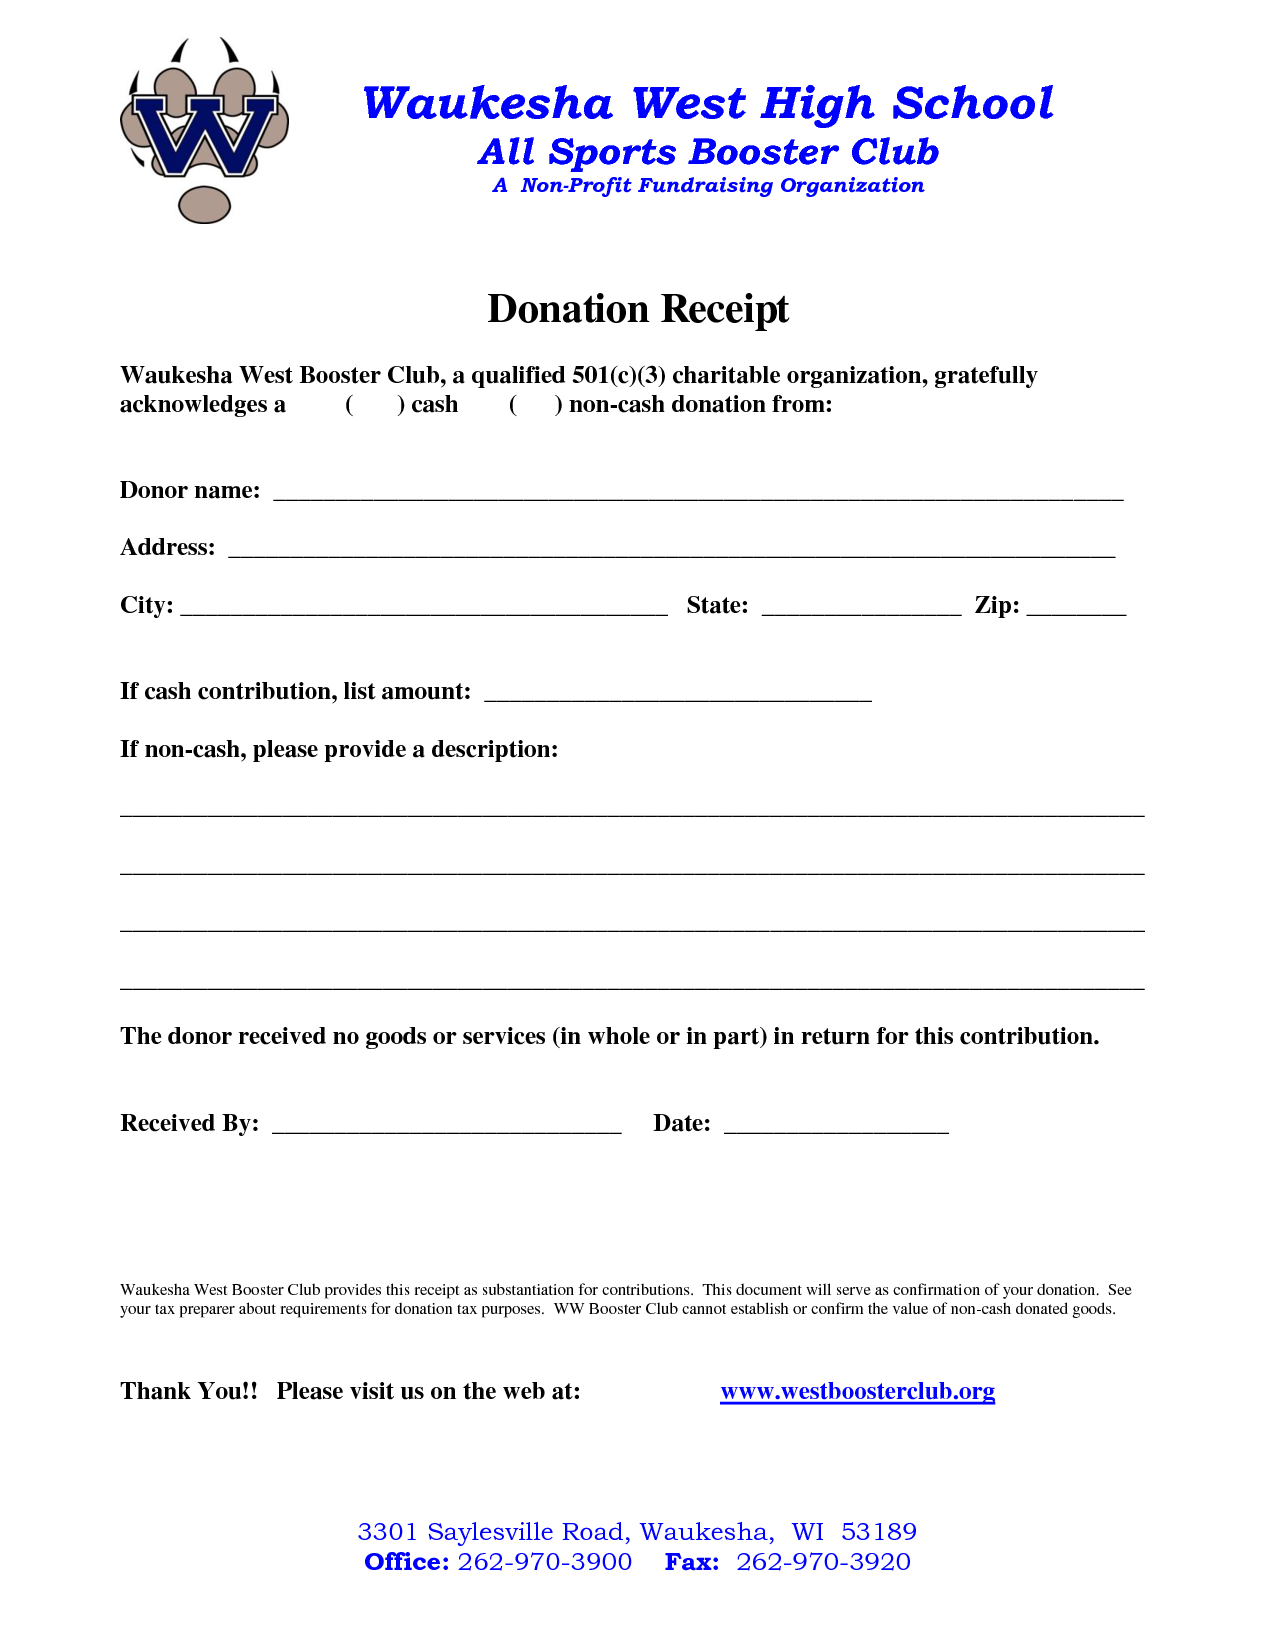 Donation Receipt Template 12 Free Samples in Word and Excel